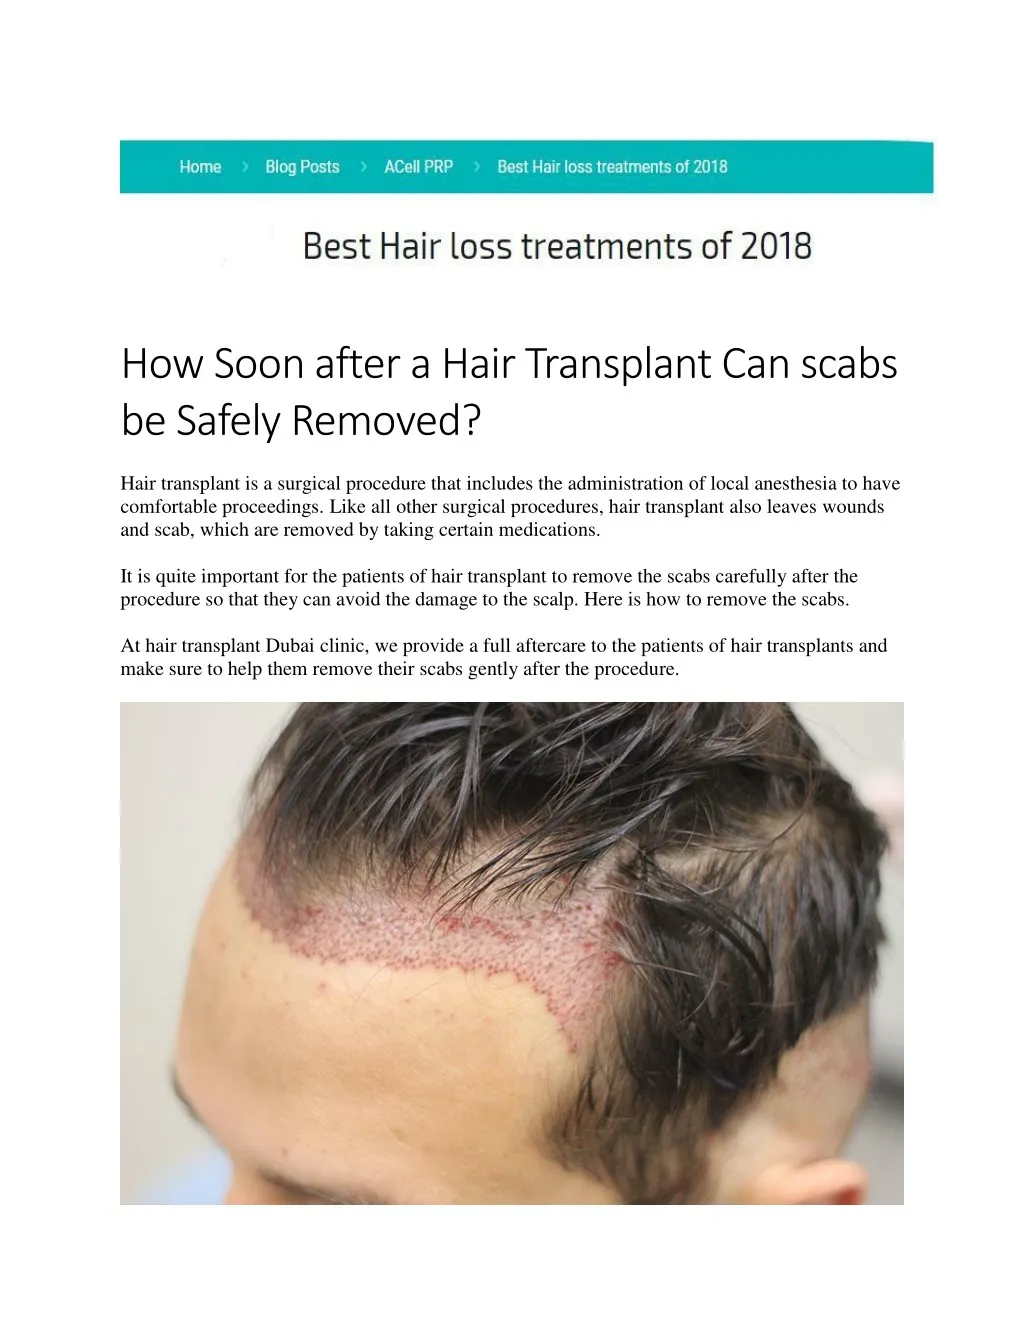 how soon after a hair transplant can scabs